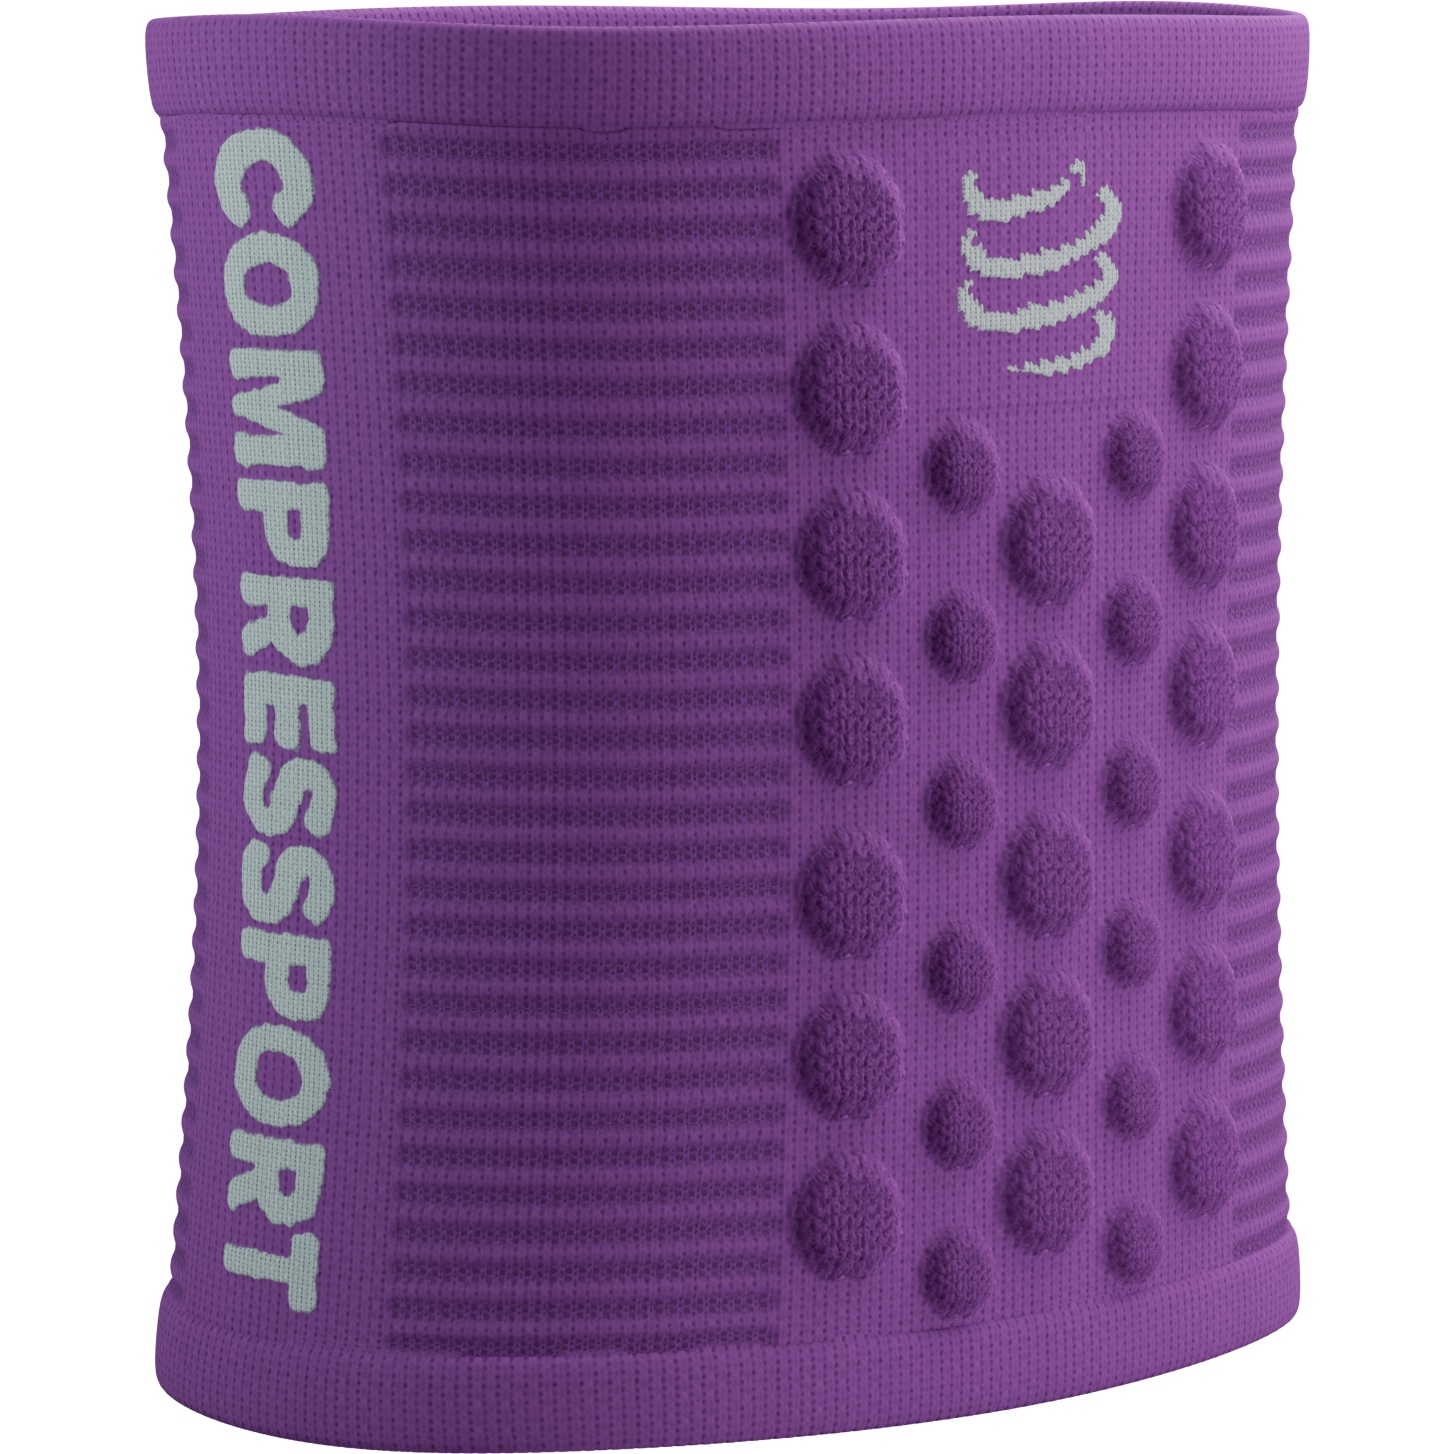 Picture of Compressport Sweatbands 3D.Dots - royal lilac/white